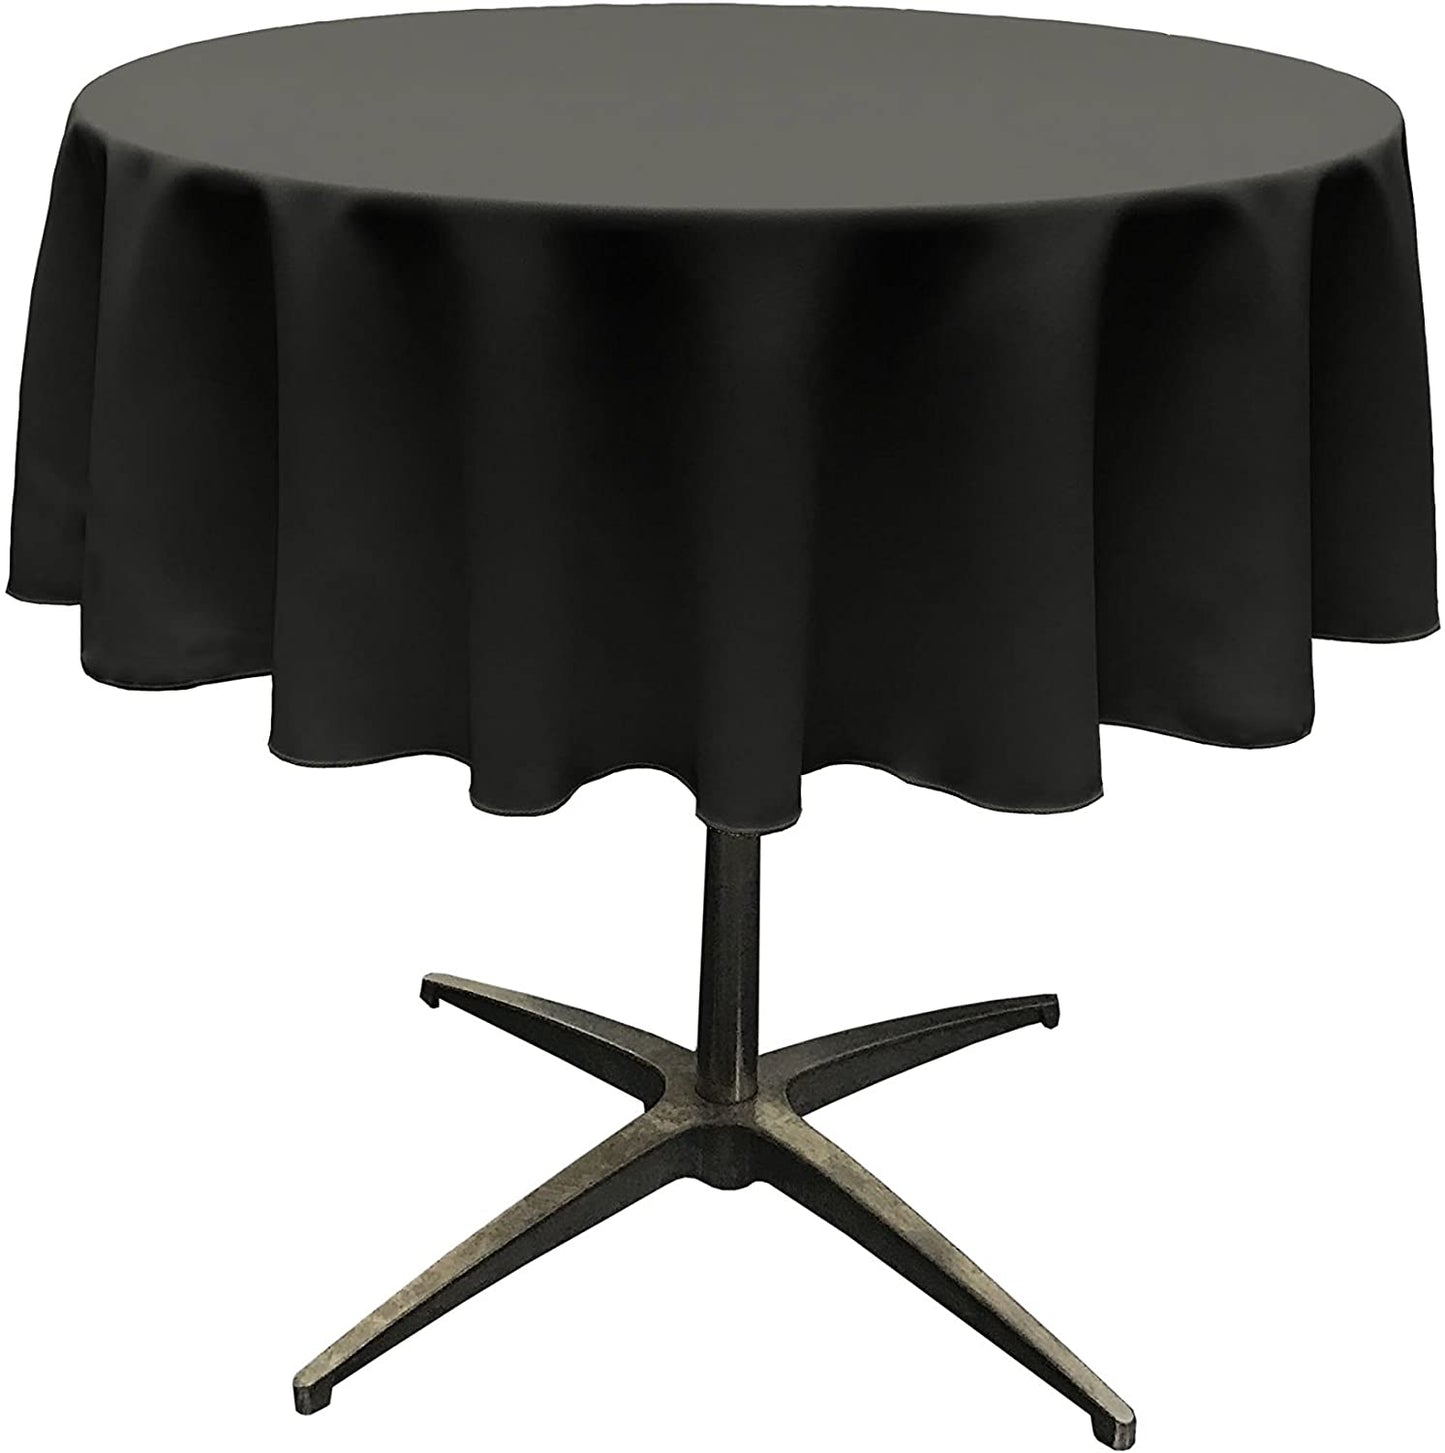 Polyester Poplin Washable Round Tablecloth, Stain and Wrinkle Resistant Table Cover Black